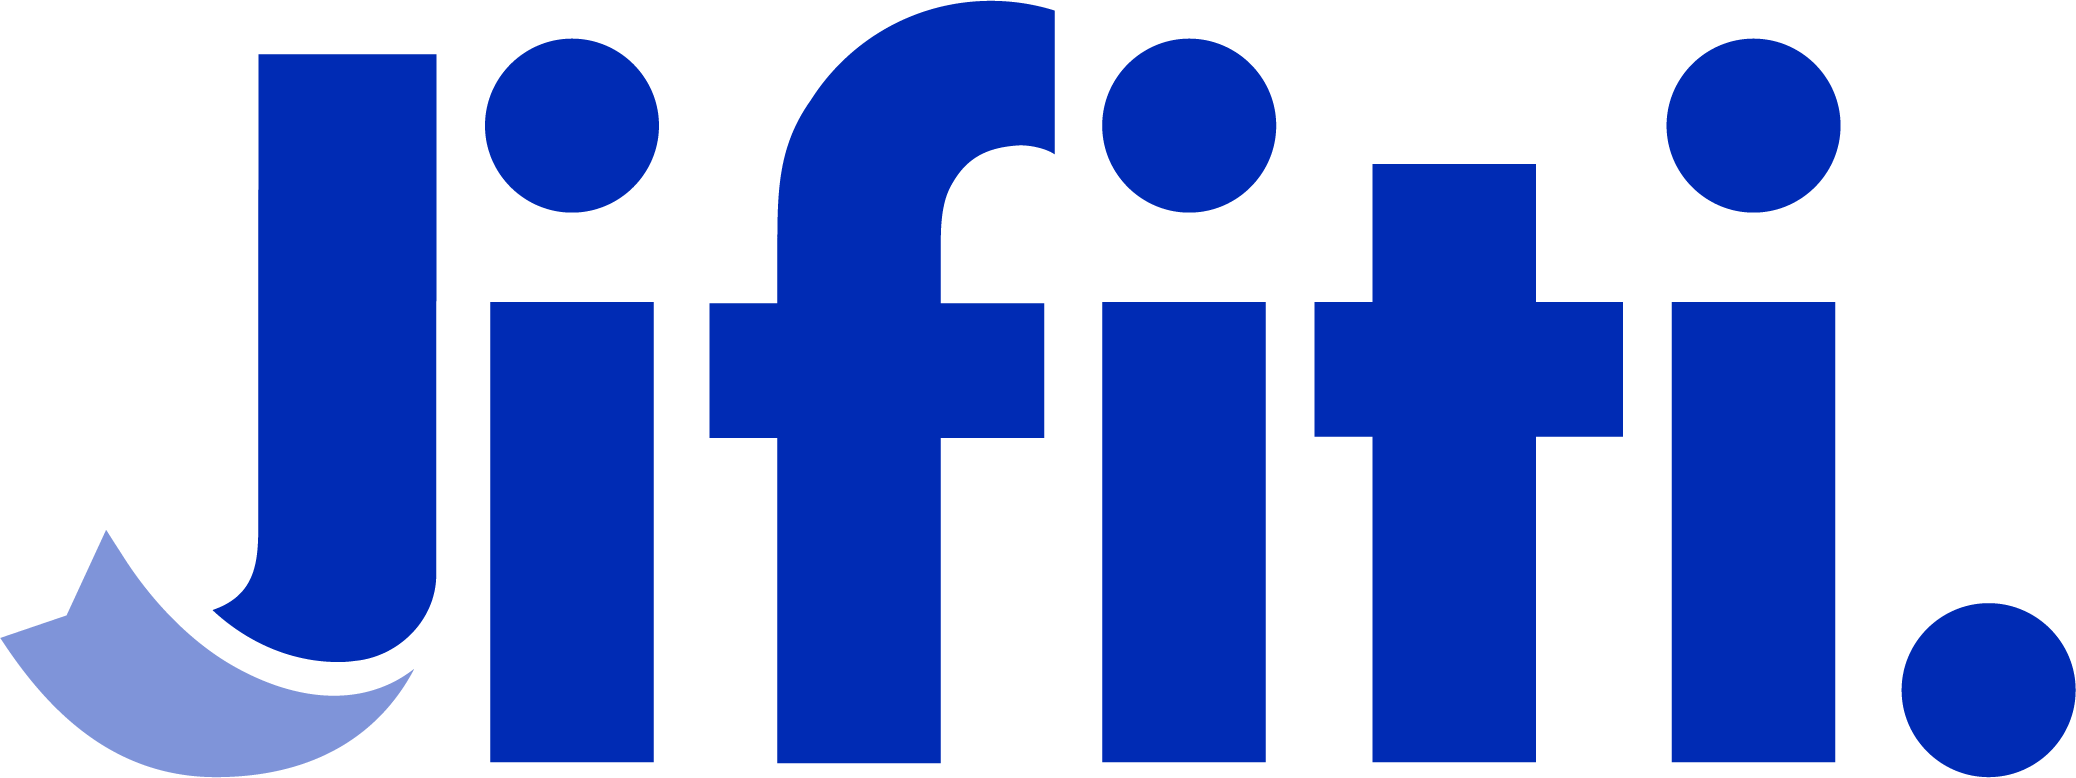 Founded in 2011, Jifiti is a leading fintech company providing white label BNPL solutions to any global market.